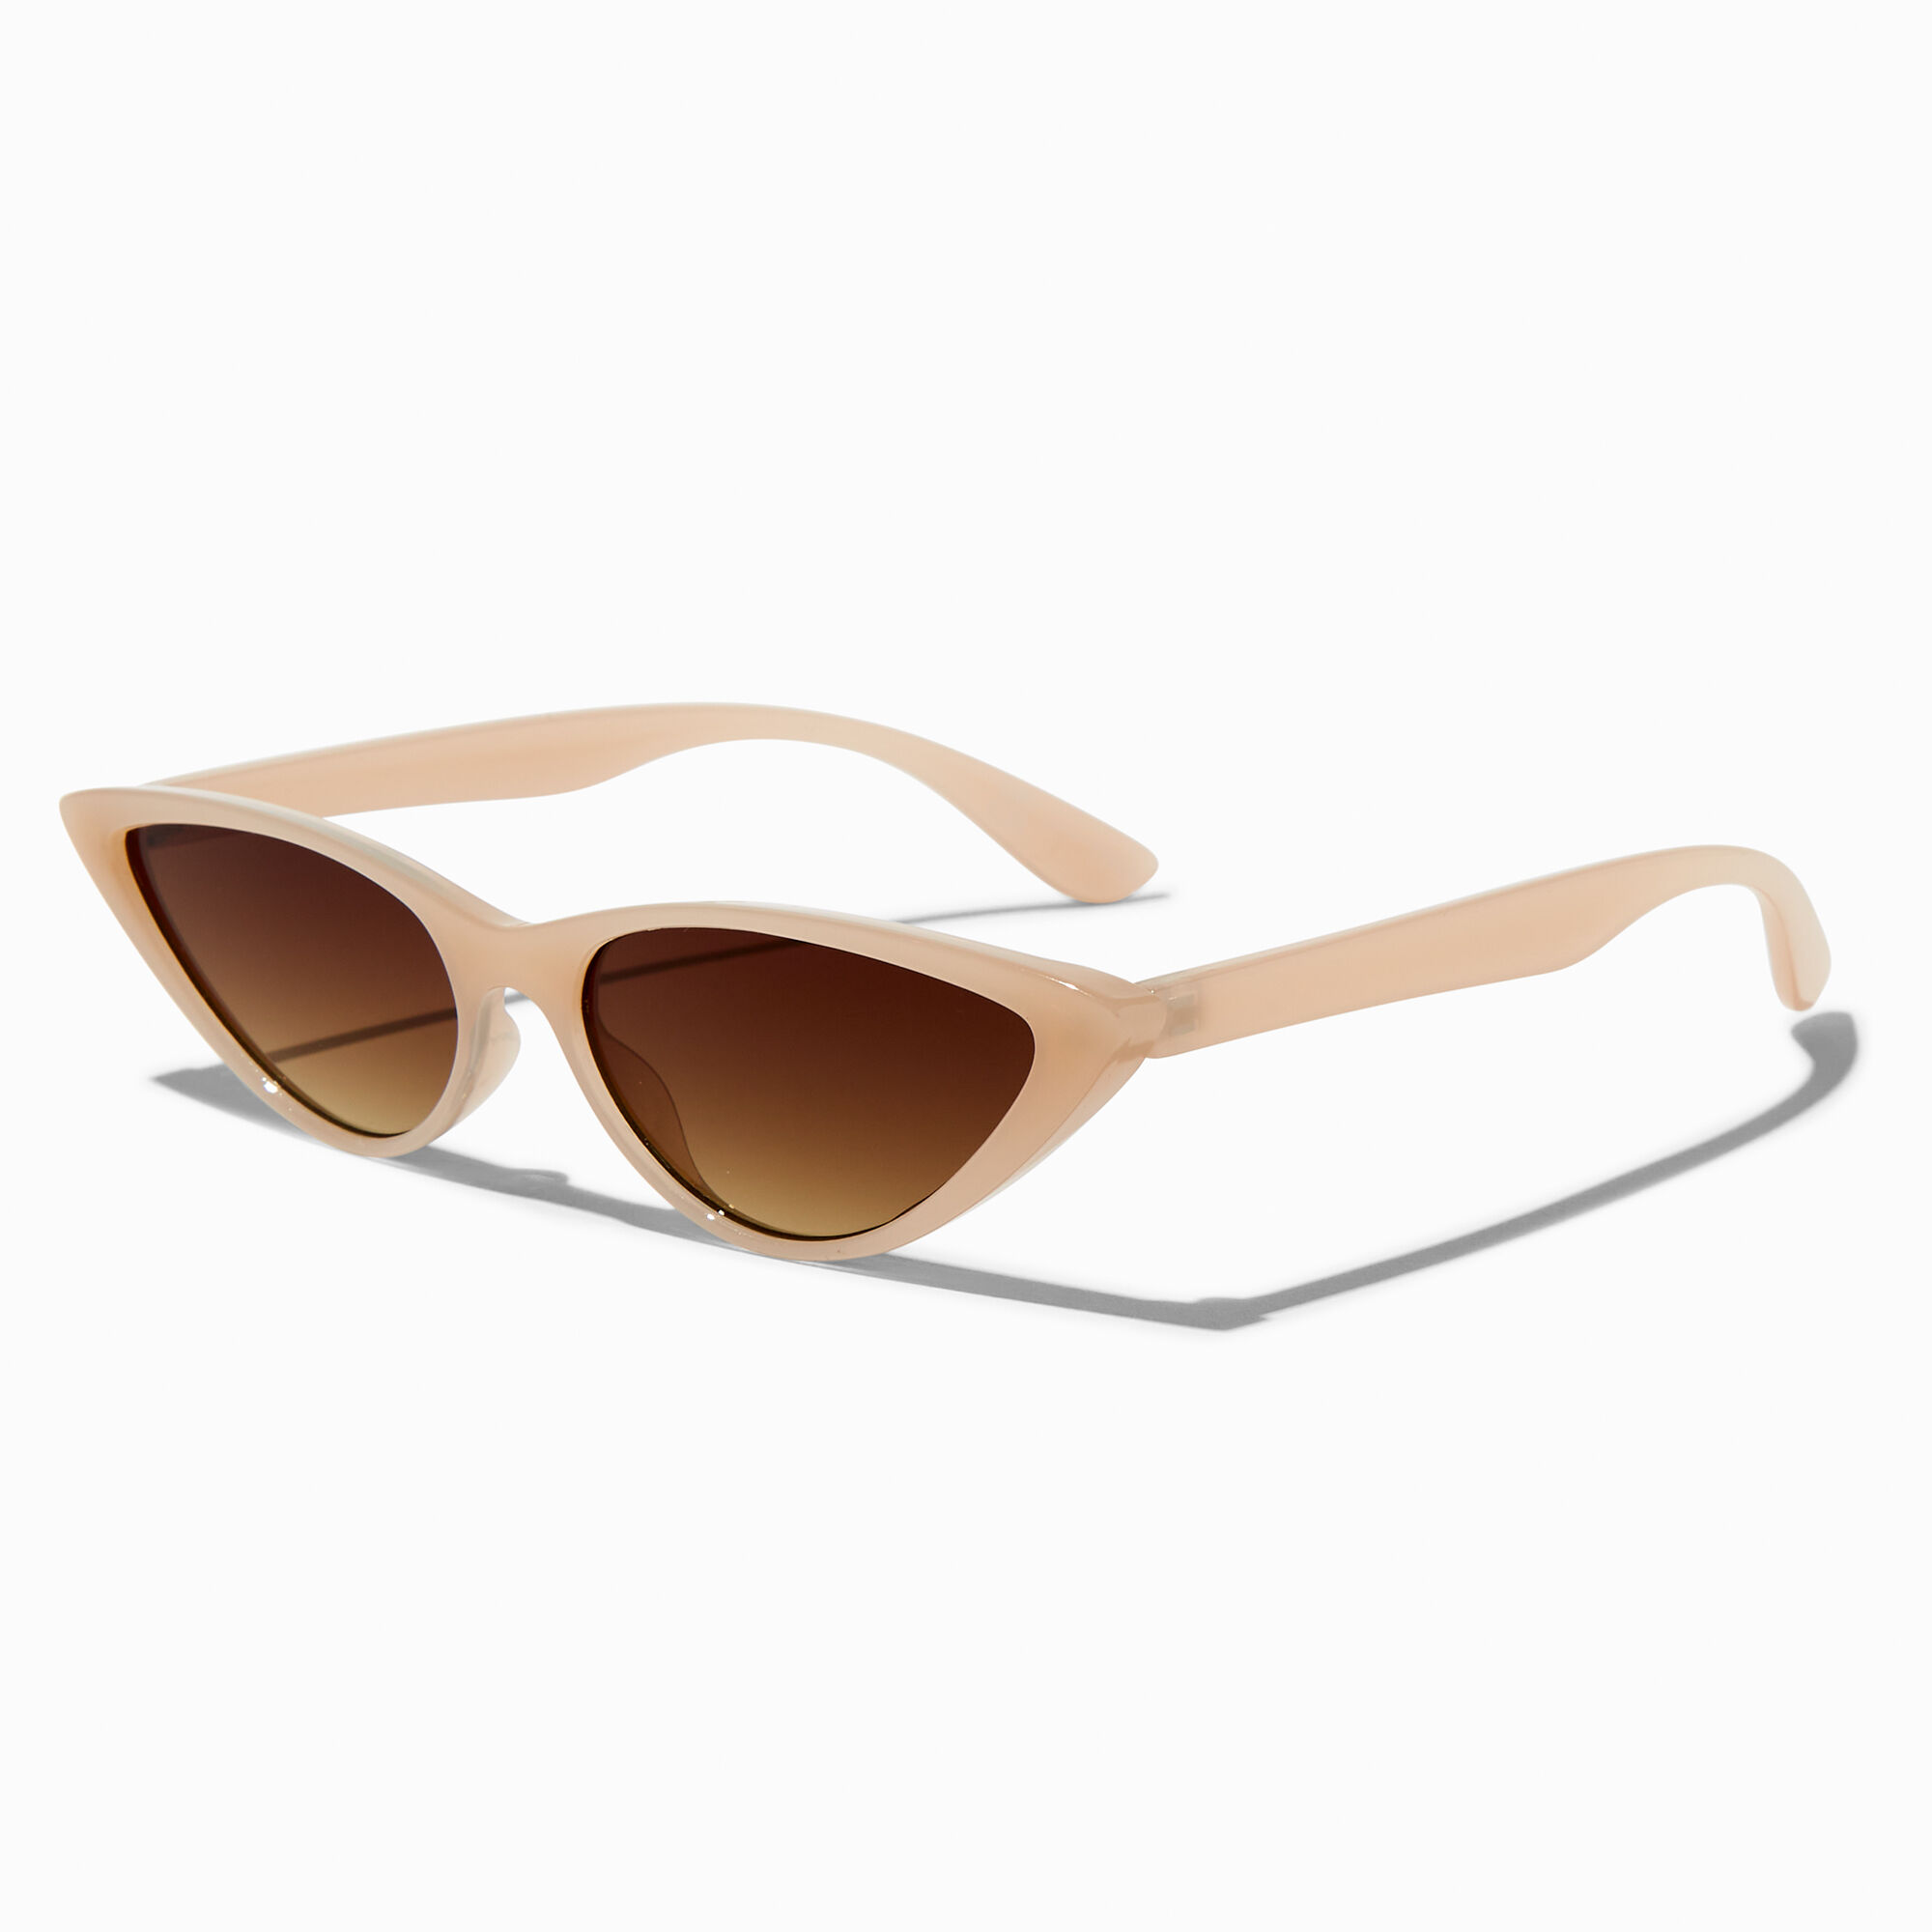 View Claires Slim Nude Cat Eye Sunglasses information